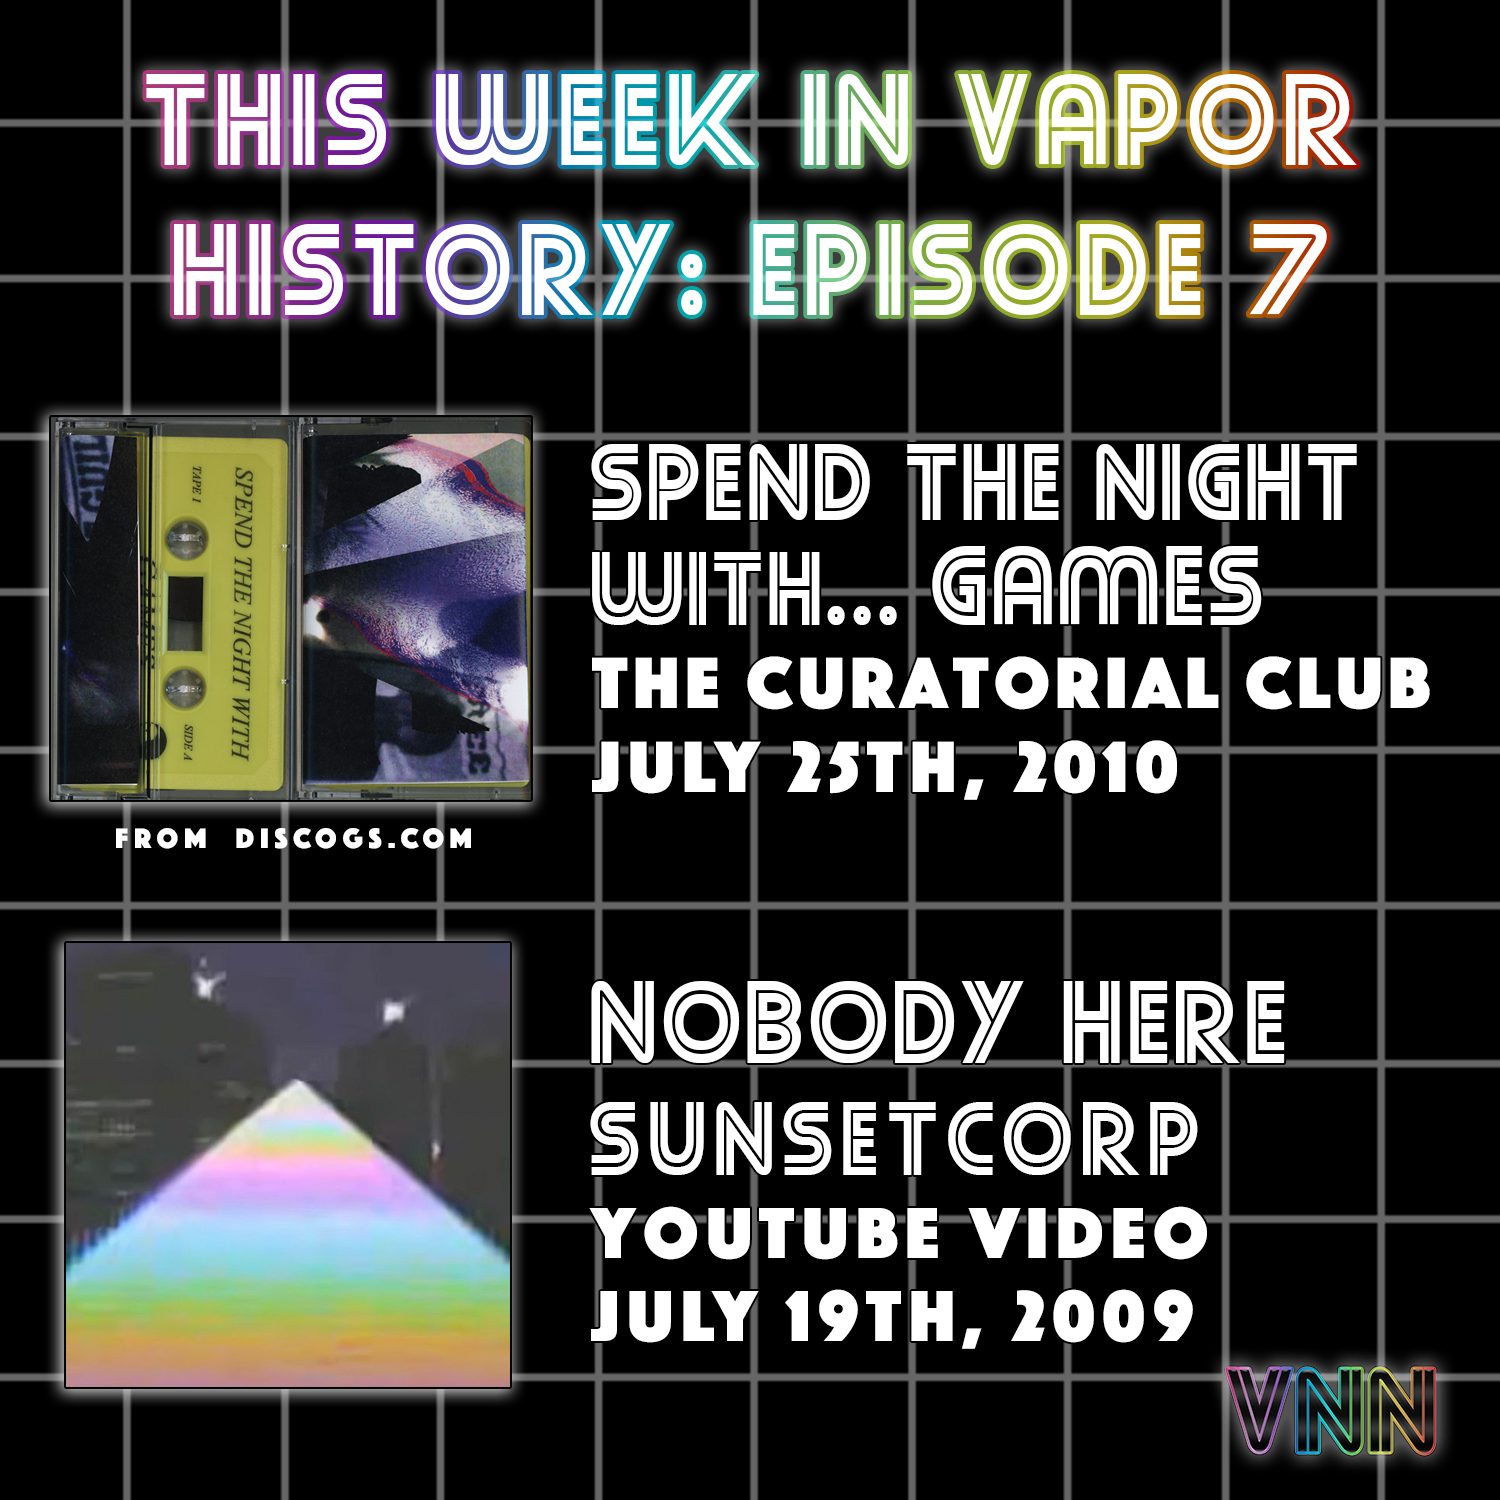 Vapor History: Spend the Night With.. Games (July 25th, 2010) & Nobody Here - sunsetcorp (July 19th, 2009)